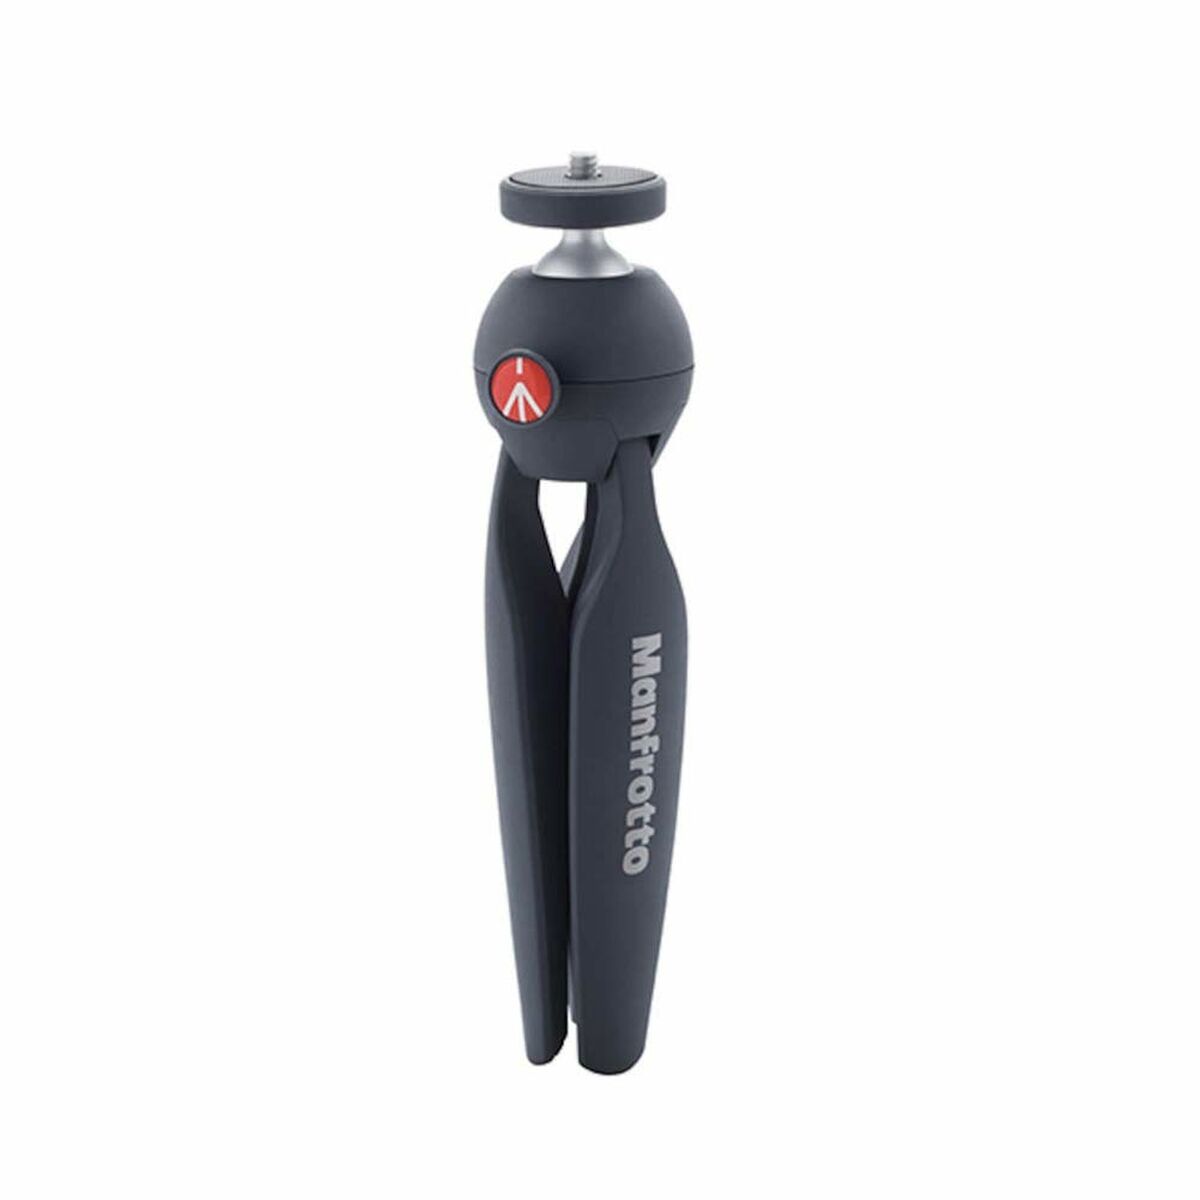 Tragbares Stativ Manfrotto MKPIXICLAMP-BK